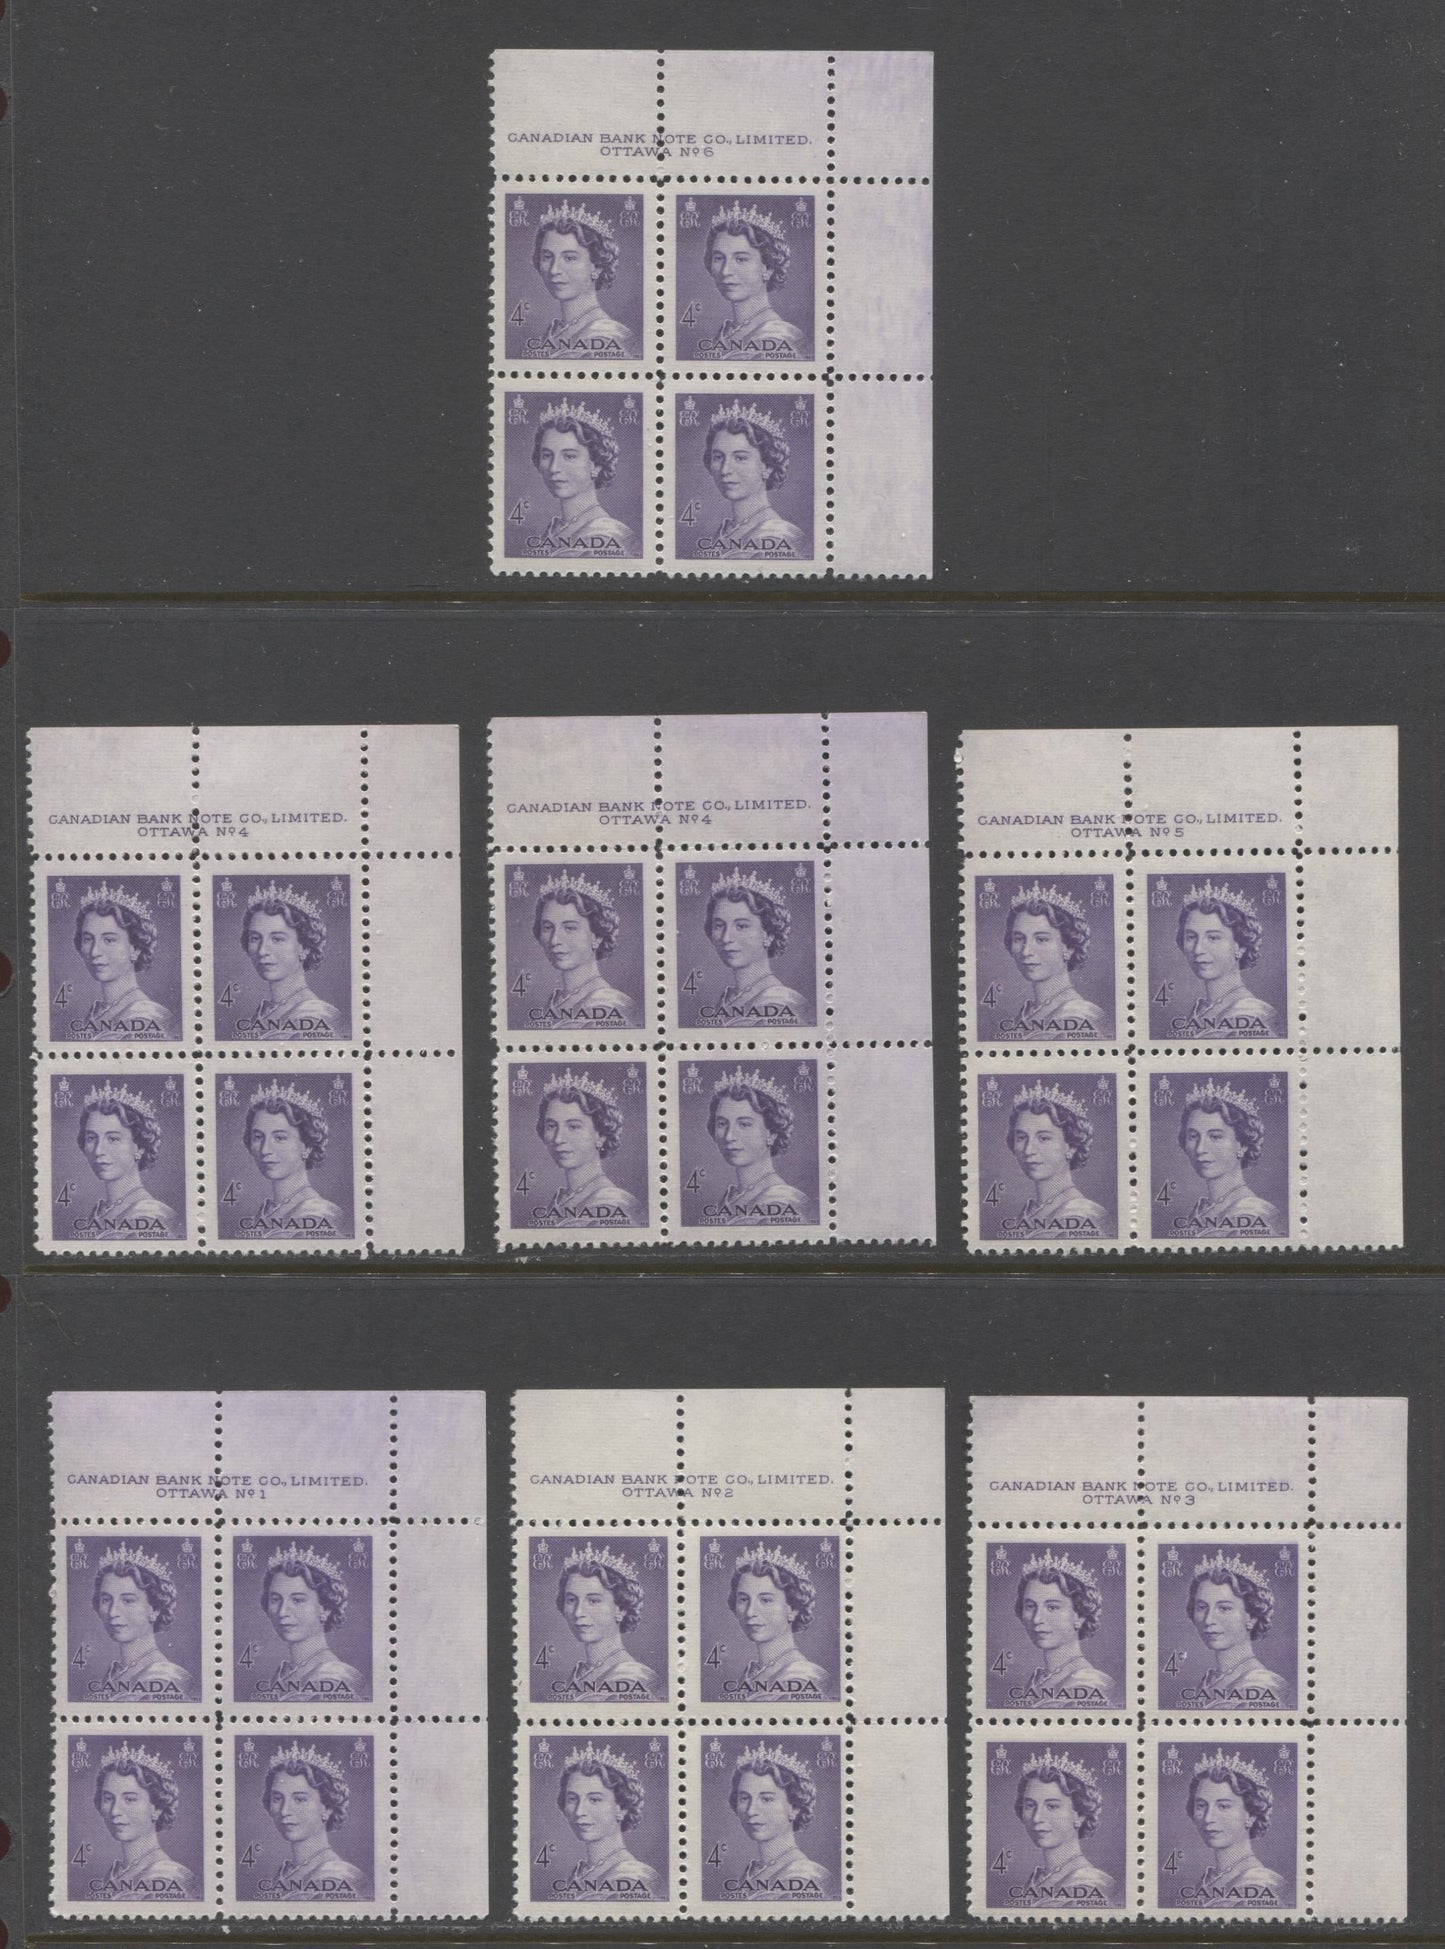 Lot 18 Canada #328 4c Violet Queen Elizabeth II, 1953 Karsh Issue, 7 F/VFNH UR Plates 1-6 Blocks Of 4 On Horizontal Ribbed Papers With Various Shades